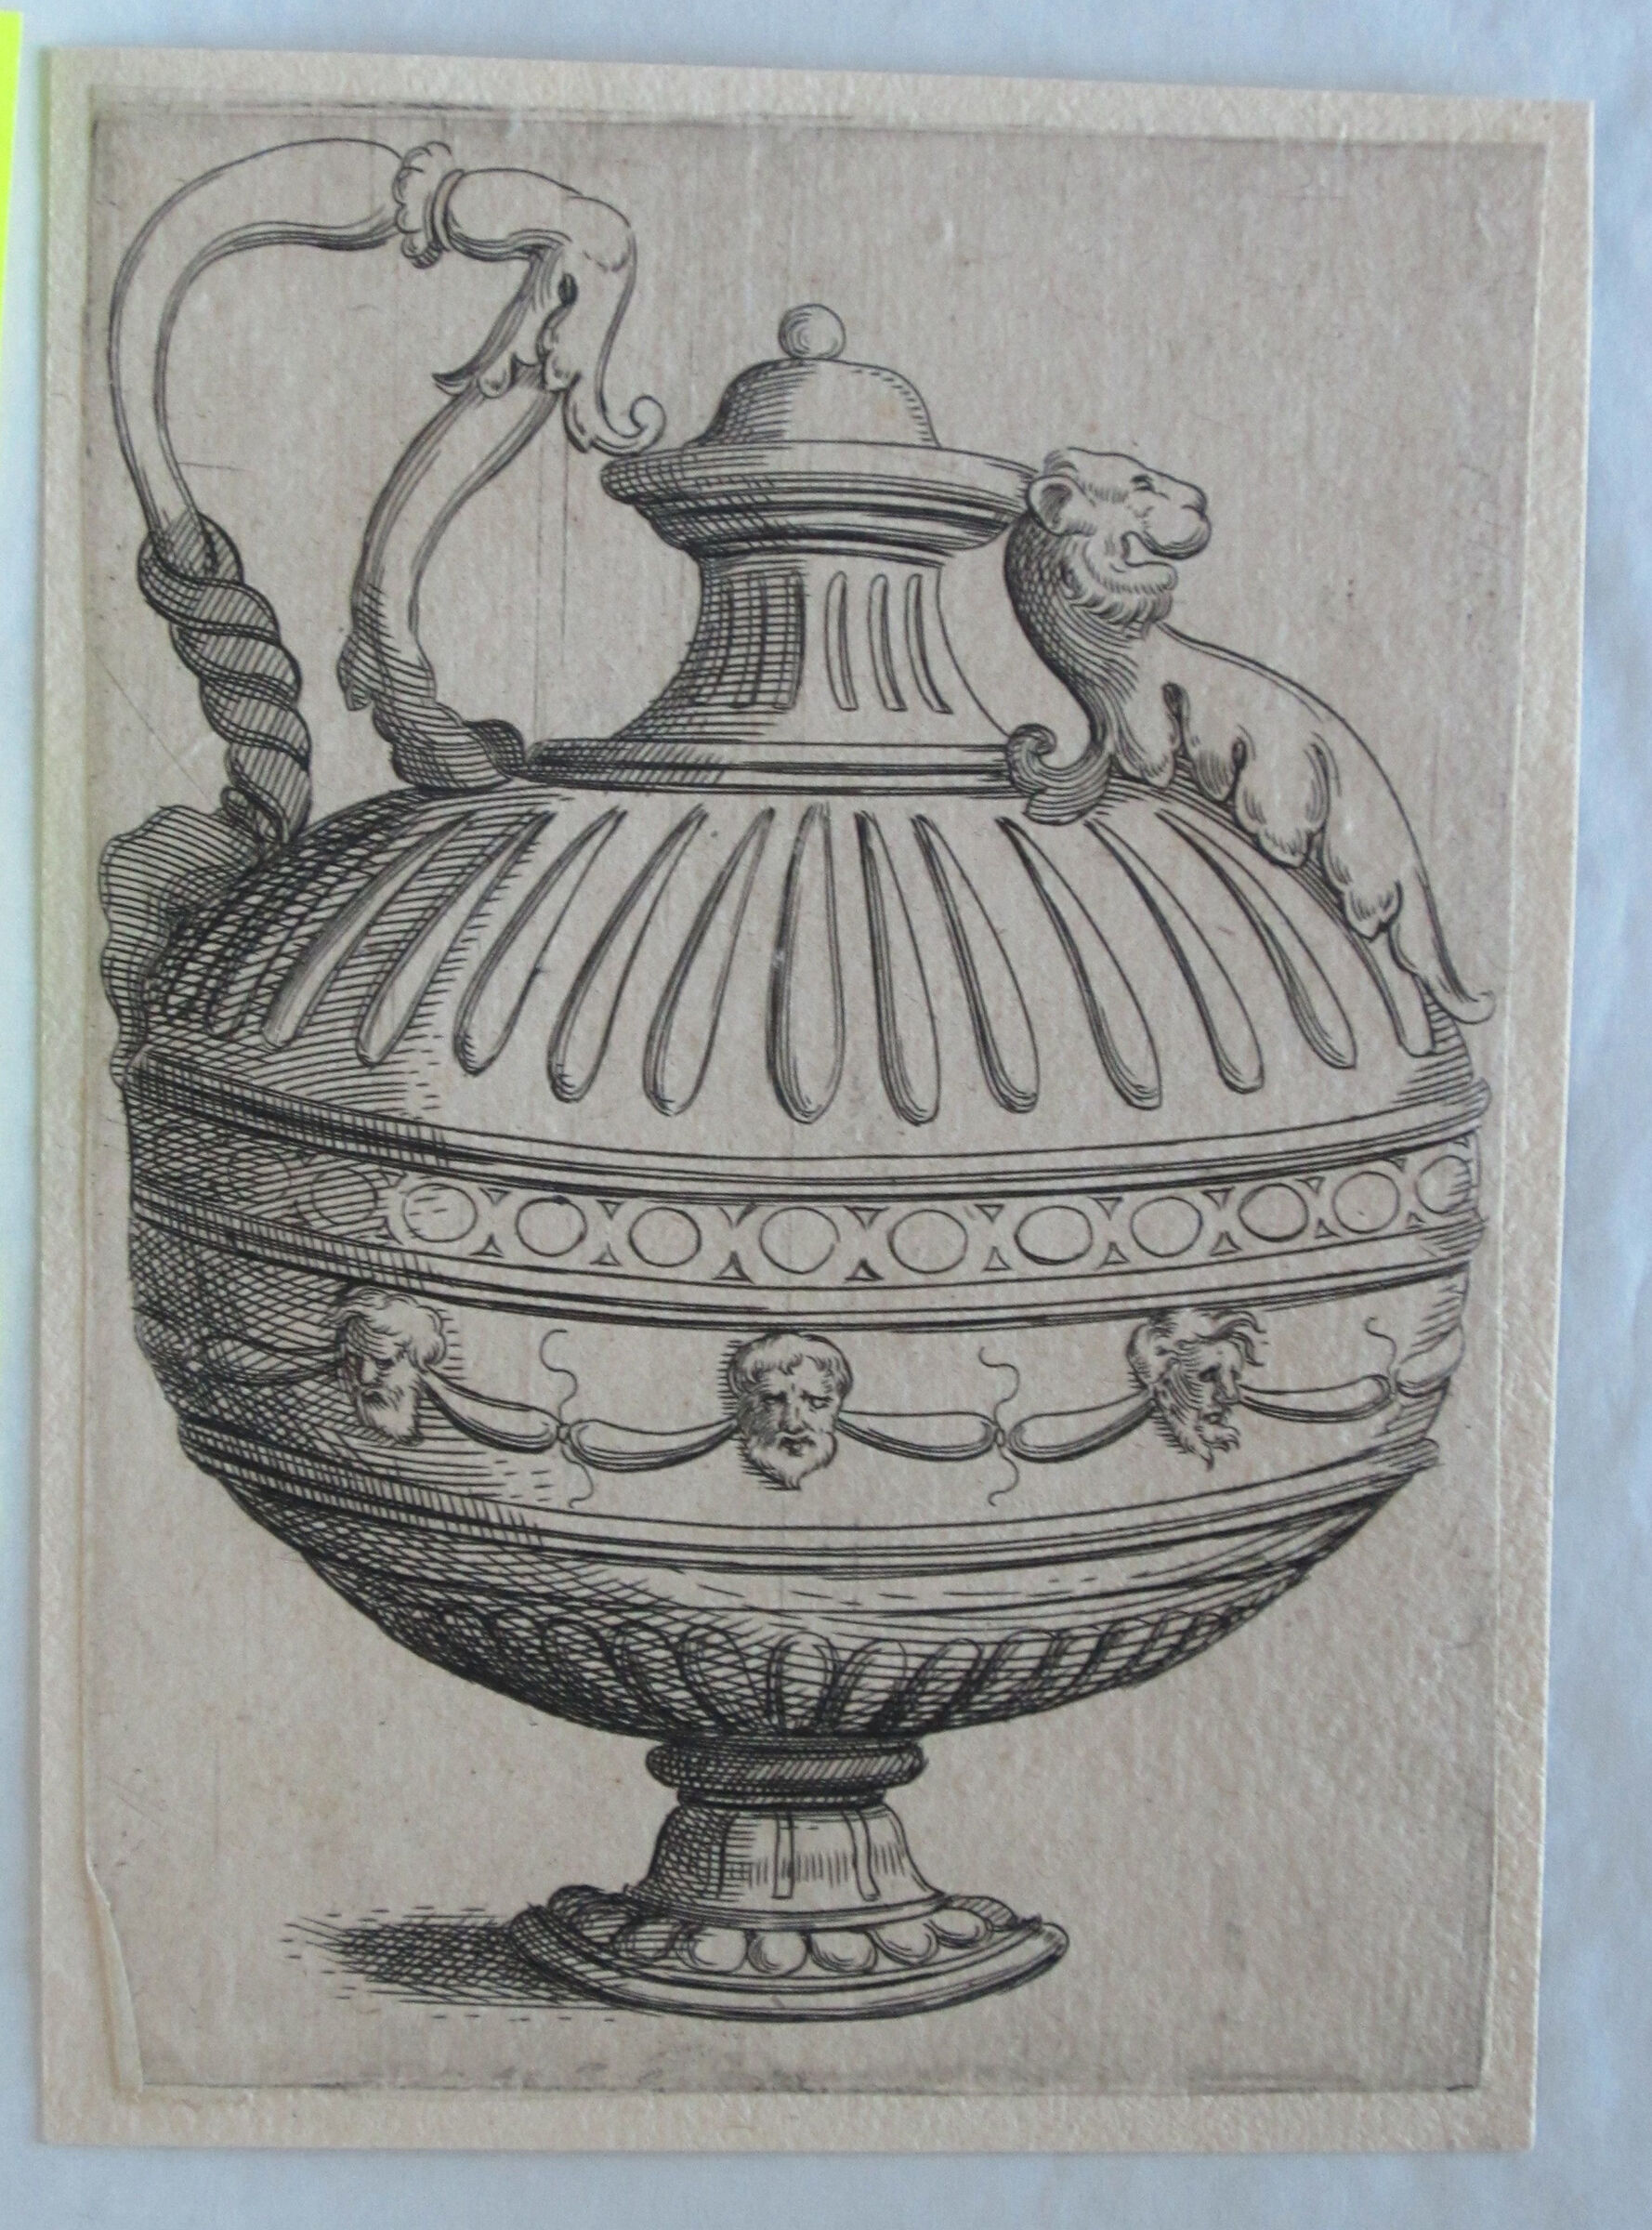 Covered Ewer With Gadrooning And The Heads Of Bearded Men, The Spout Formed By A Lion's Head